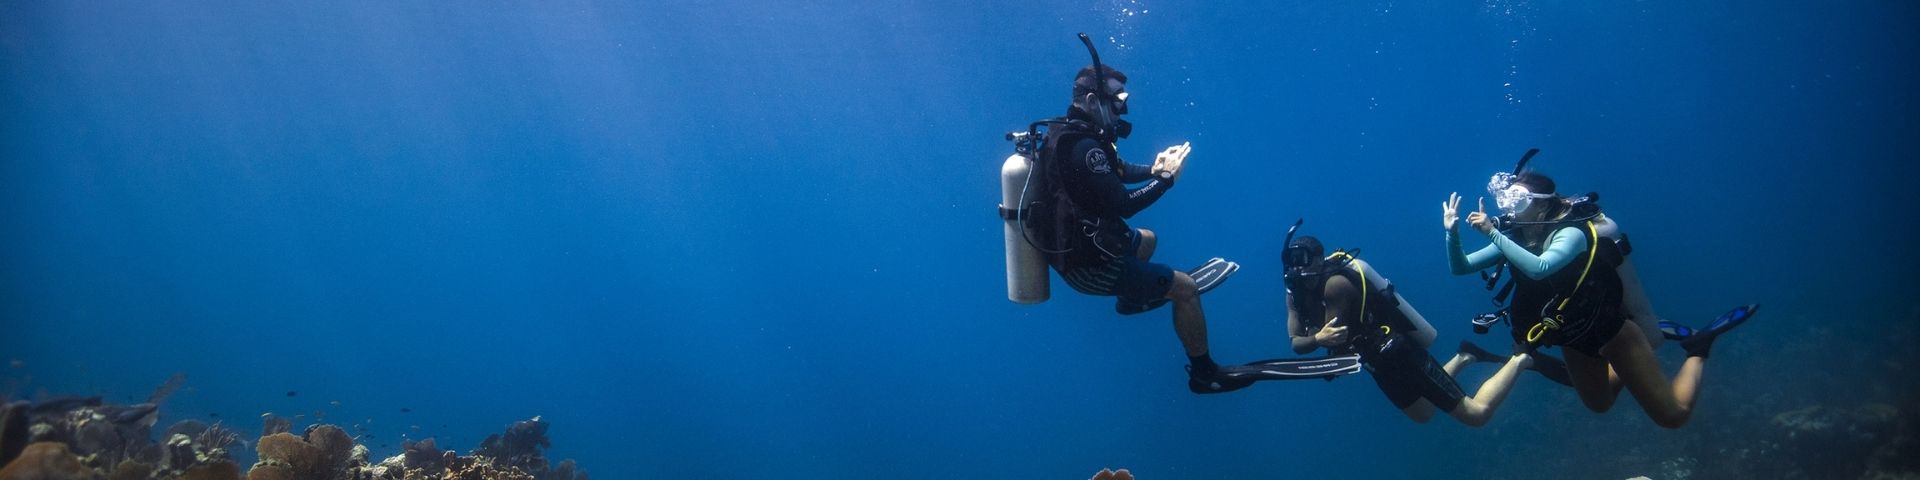 Scuba Diving Courses in India | Dive School in India | PADI certification courses | Learn Scuba Diving in Havelock